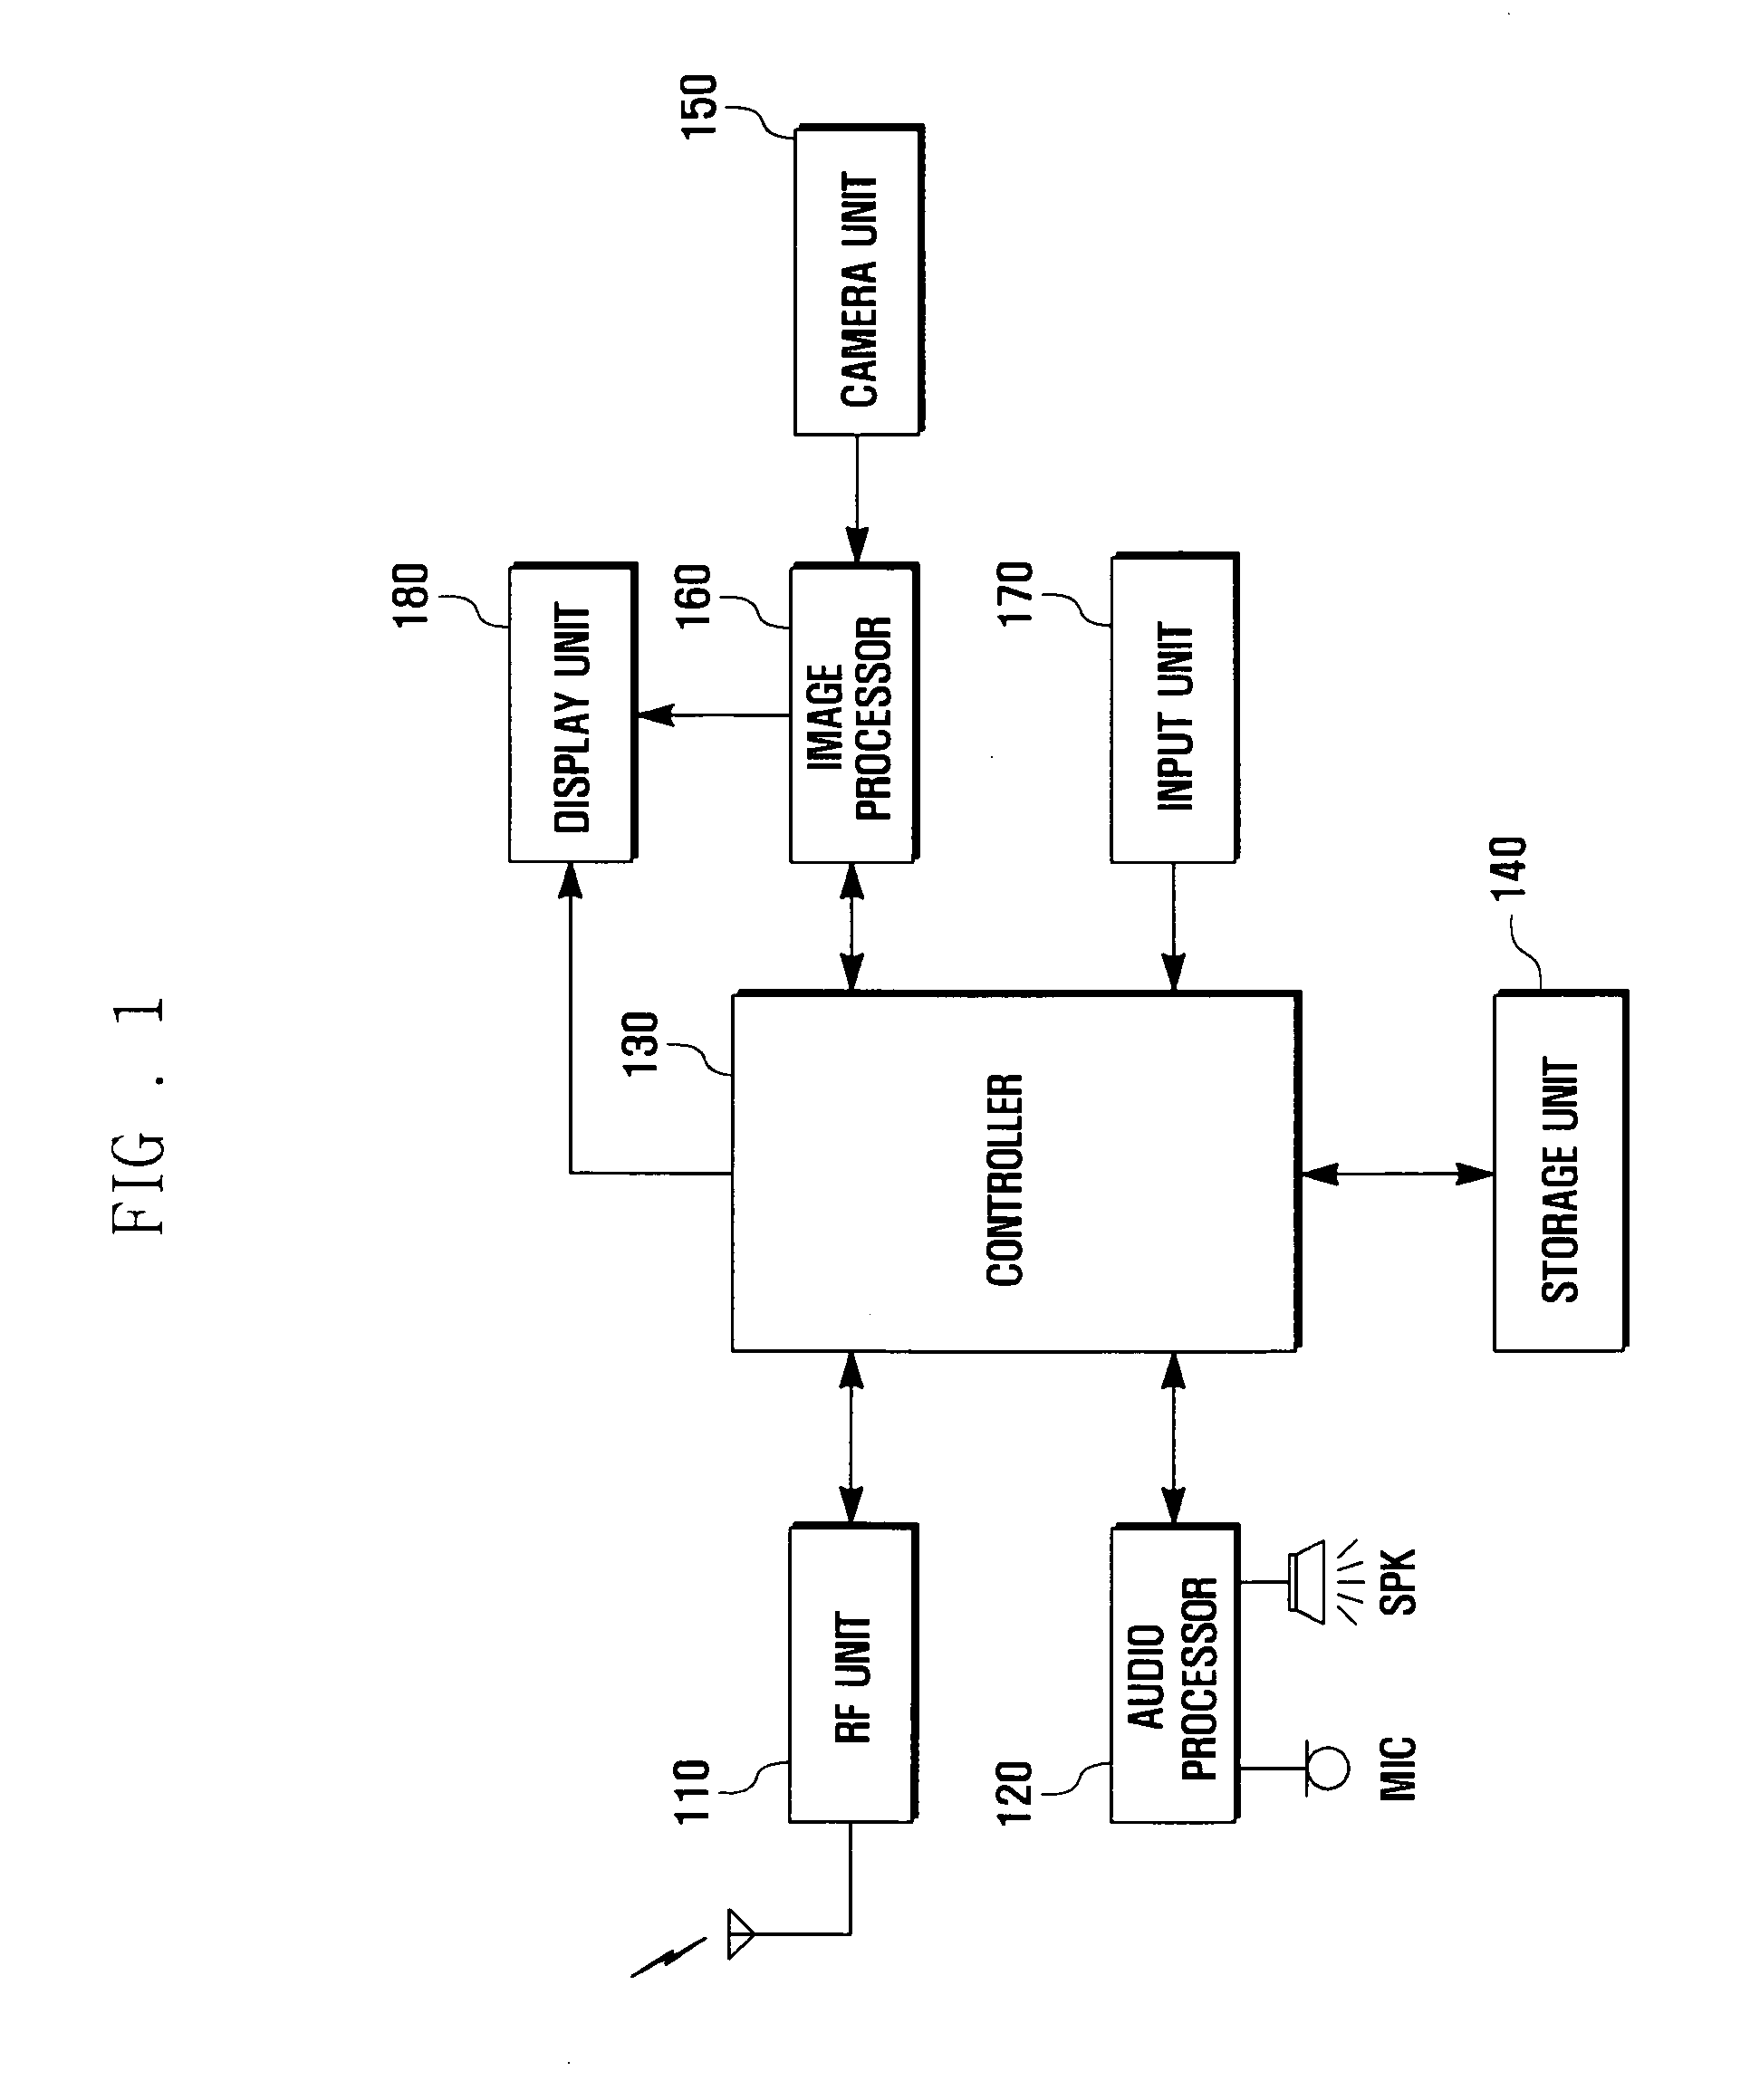 Method and device for synthesizing image